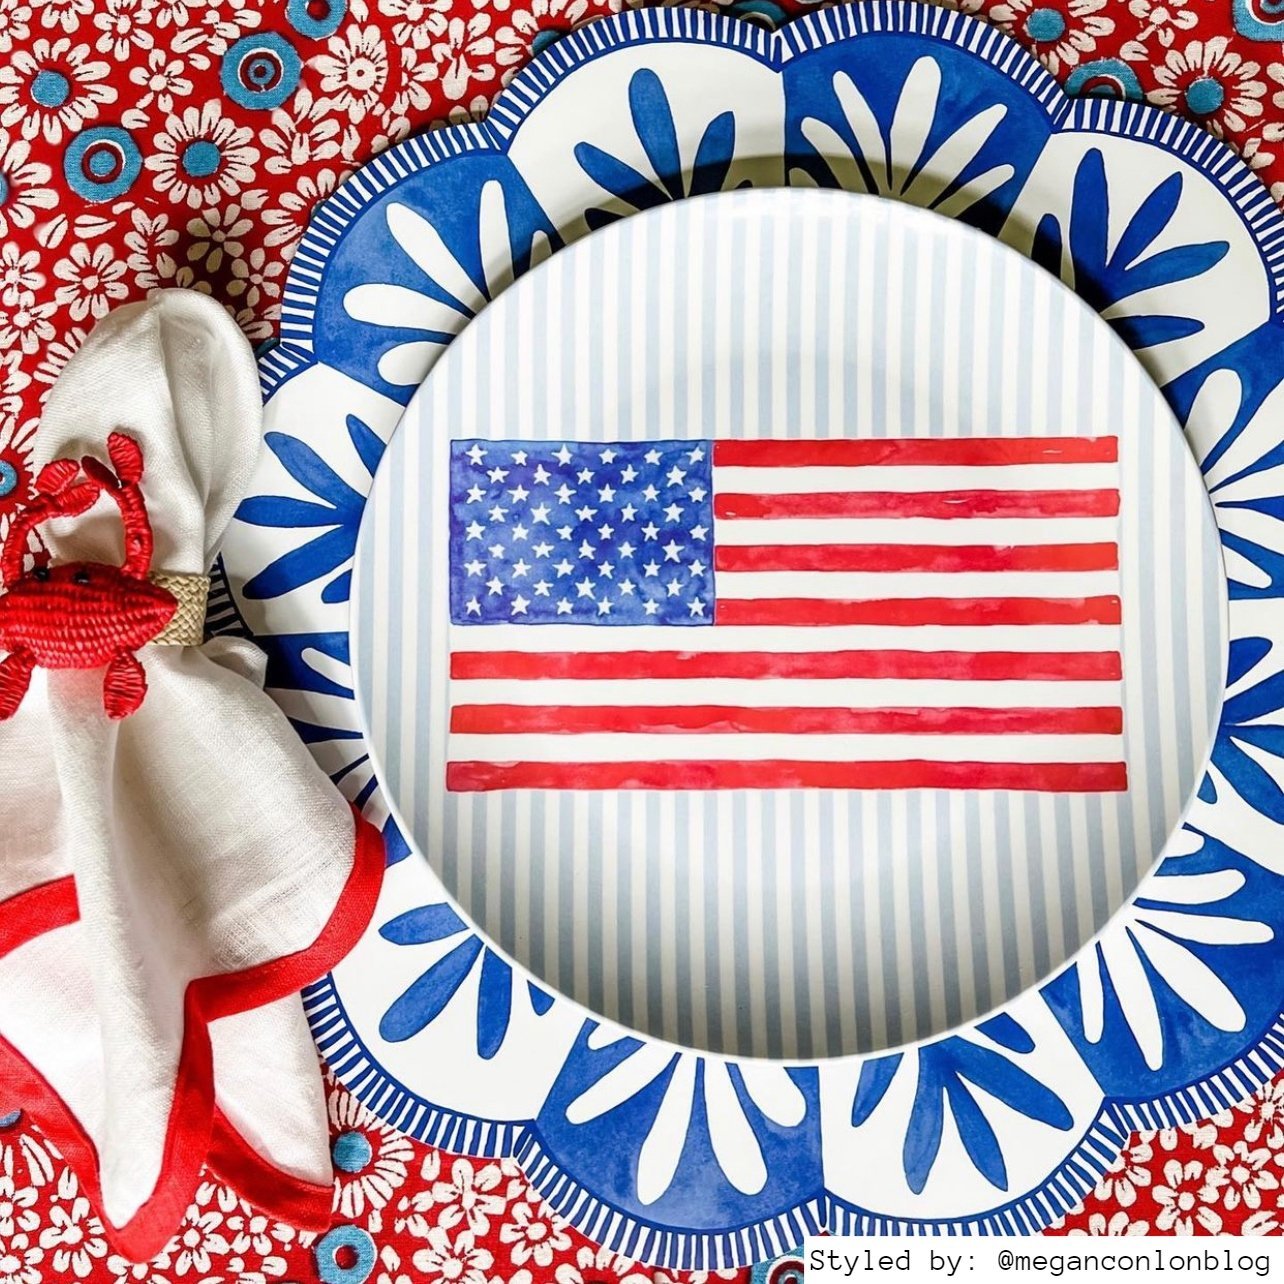 Blue and white scalloped paper placemat layered with an American flag plate and red and white napkin with a crab napkin ring on a red, white and blue floral tablecloth